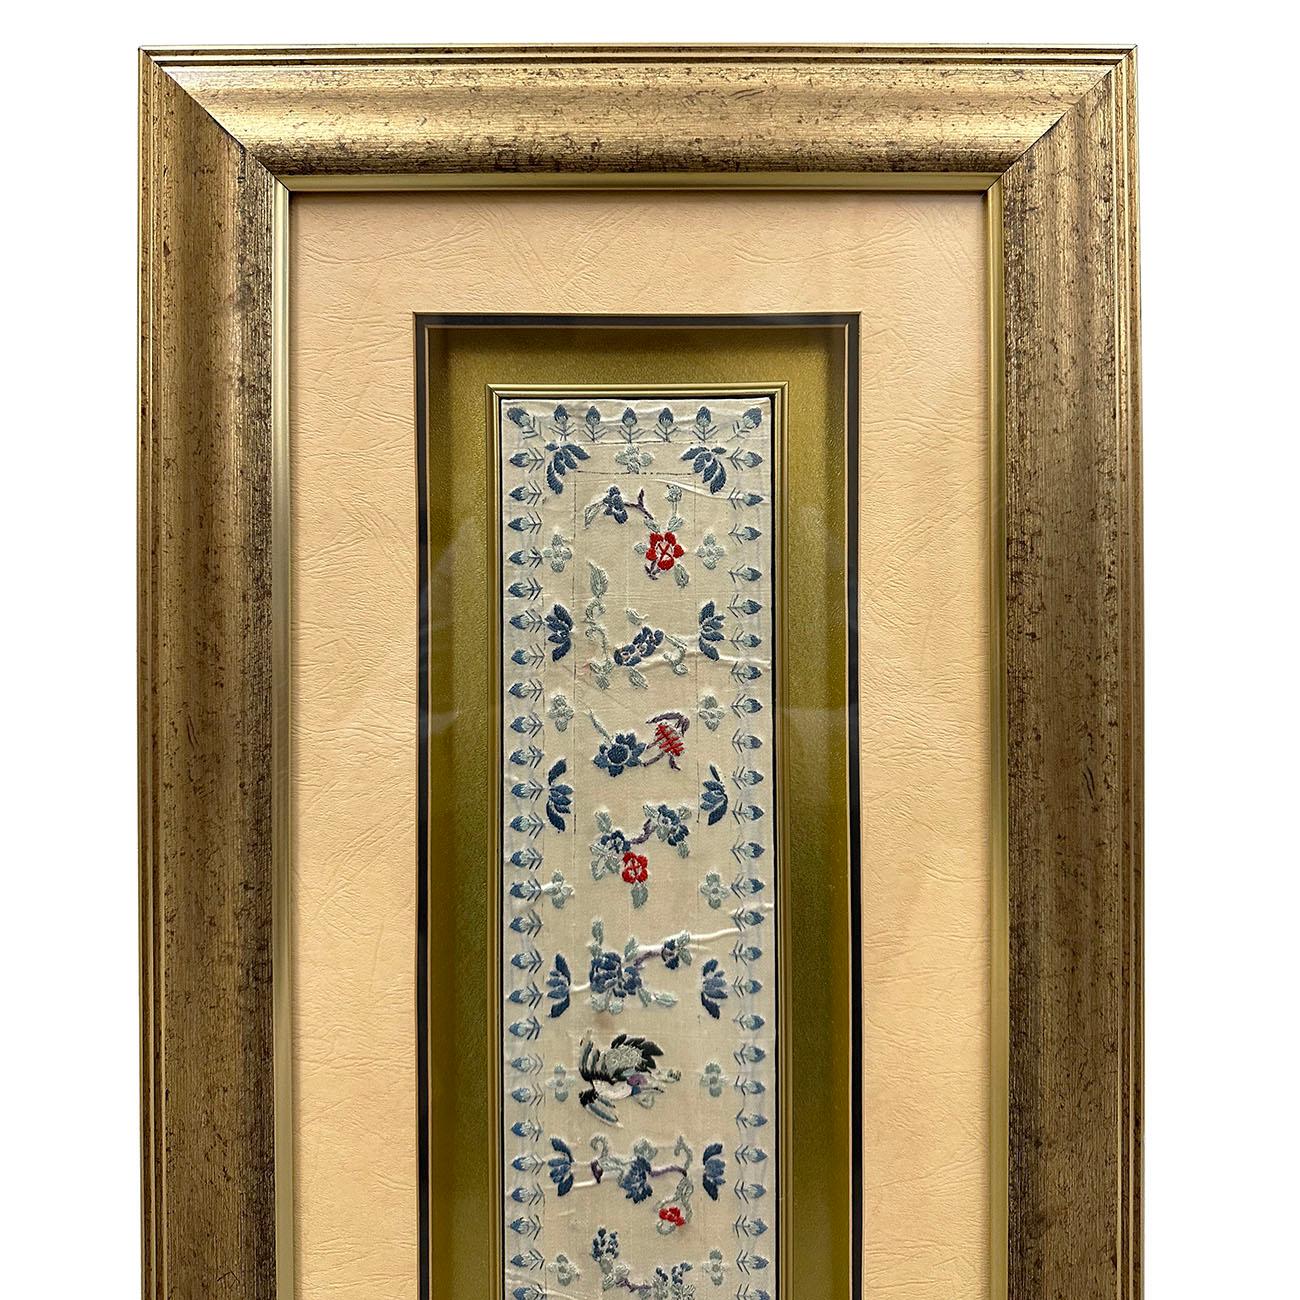 

An antique Chinese silk embroidery in 3D framed. The museum quality display wall decor. There are numerous auspicious symbols and Birds, floral embroidered in colored silk threads were included, such as birds and peony etc. The textiles are dated